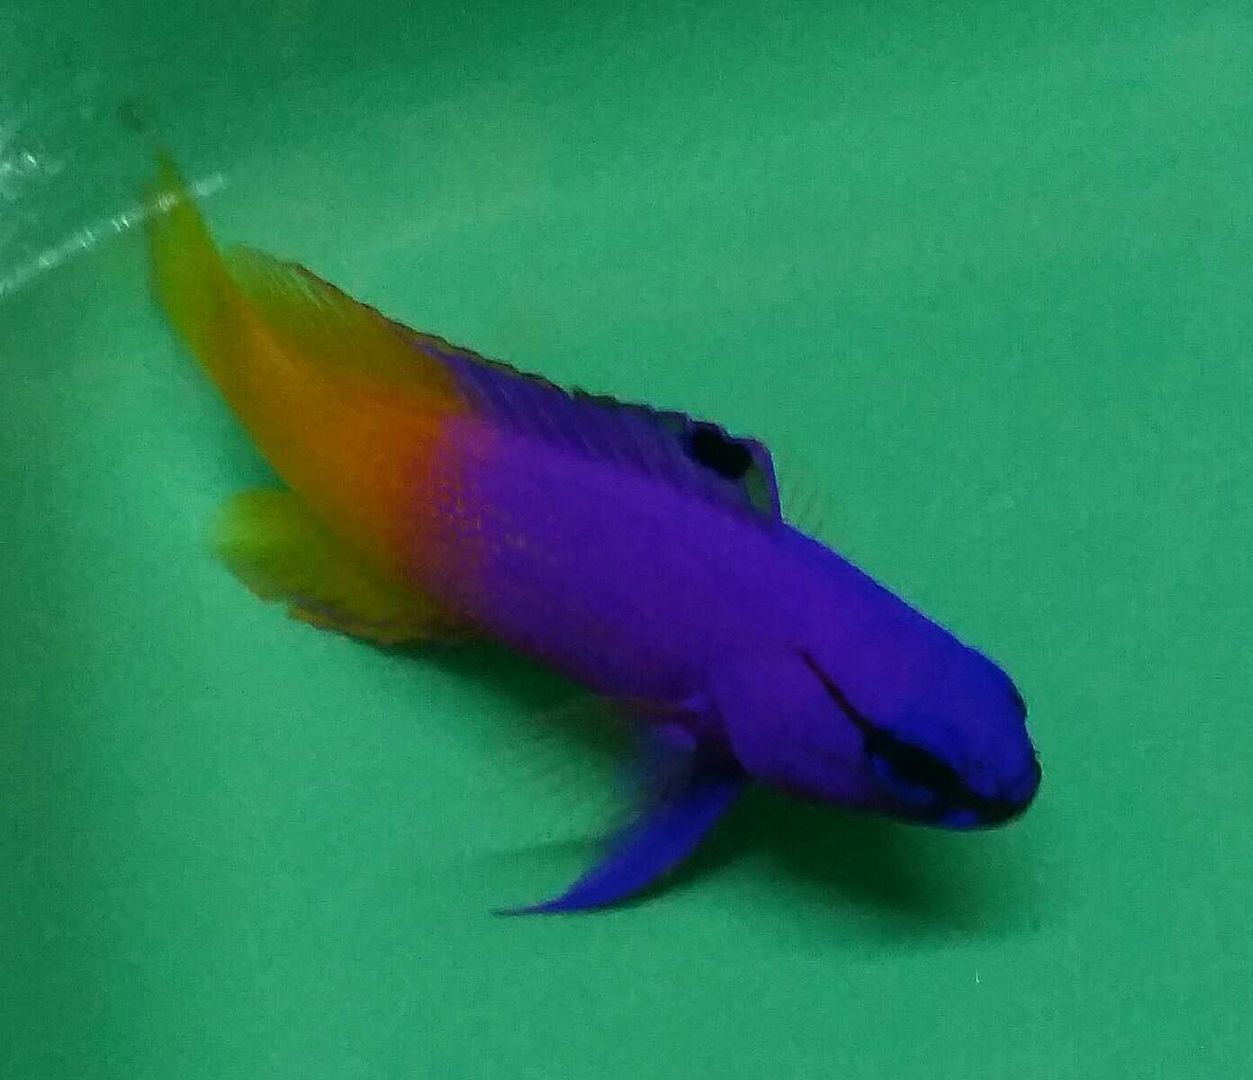 20180707 133117 1 preview zpscmkprnnr - Our Tanks Are Full Of Everything! Come On Out And Stock Your Aquarium Up!!!